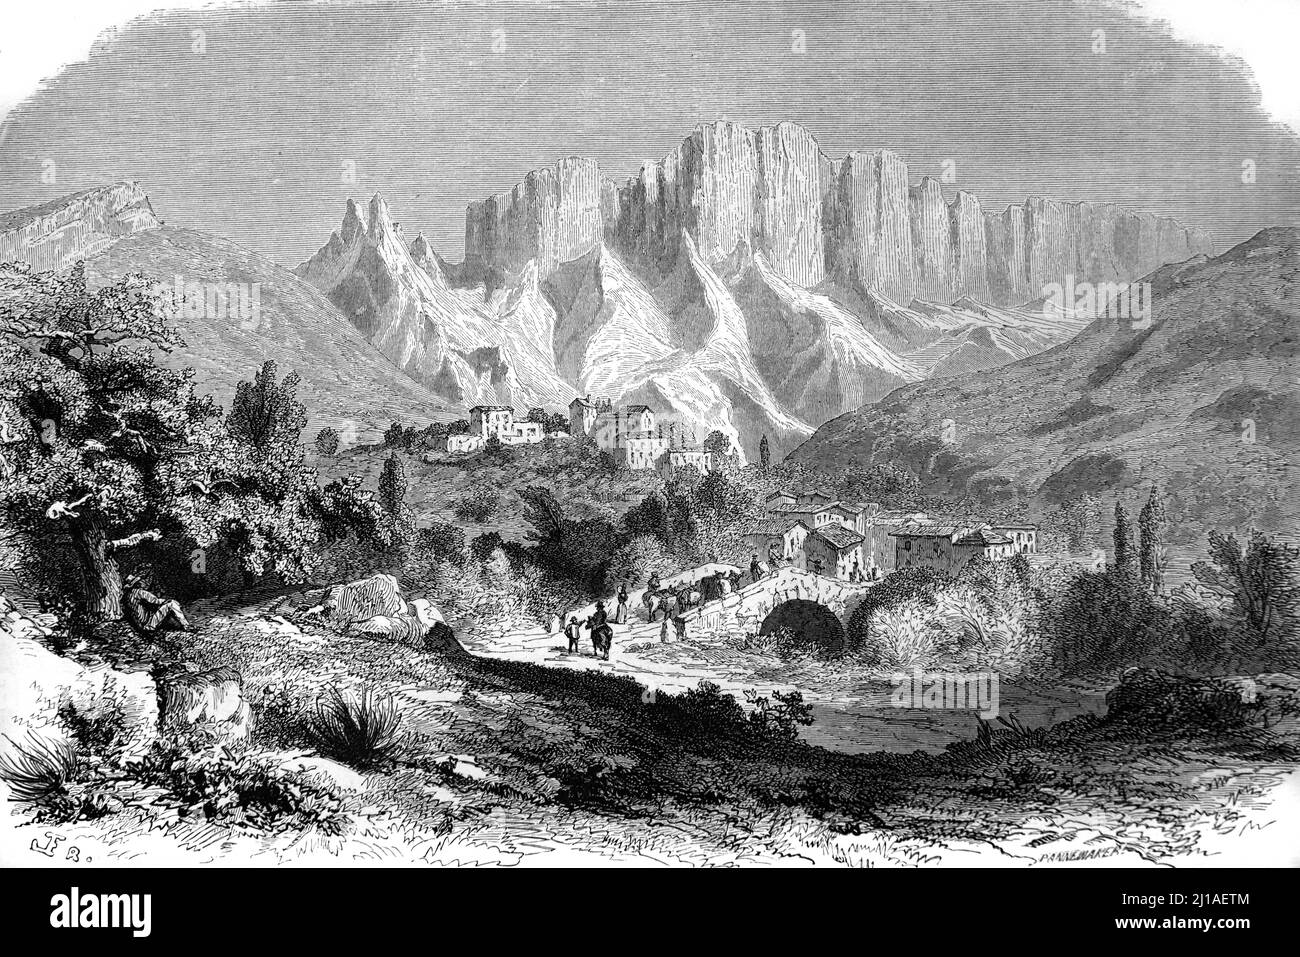 View of the Glandasse Mountain (2041m) Valley and Romeyer Village in the Pays Diois in the Vercors Massif or Vercors Regional Park Drôme France. Vintage Illustration or Engraving 1860. Stock Photo